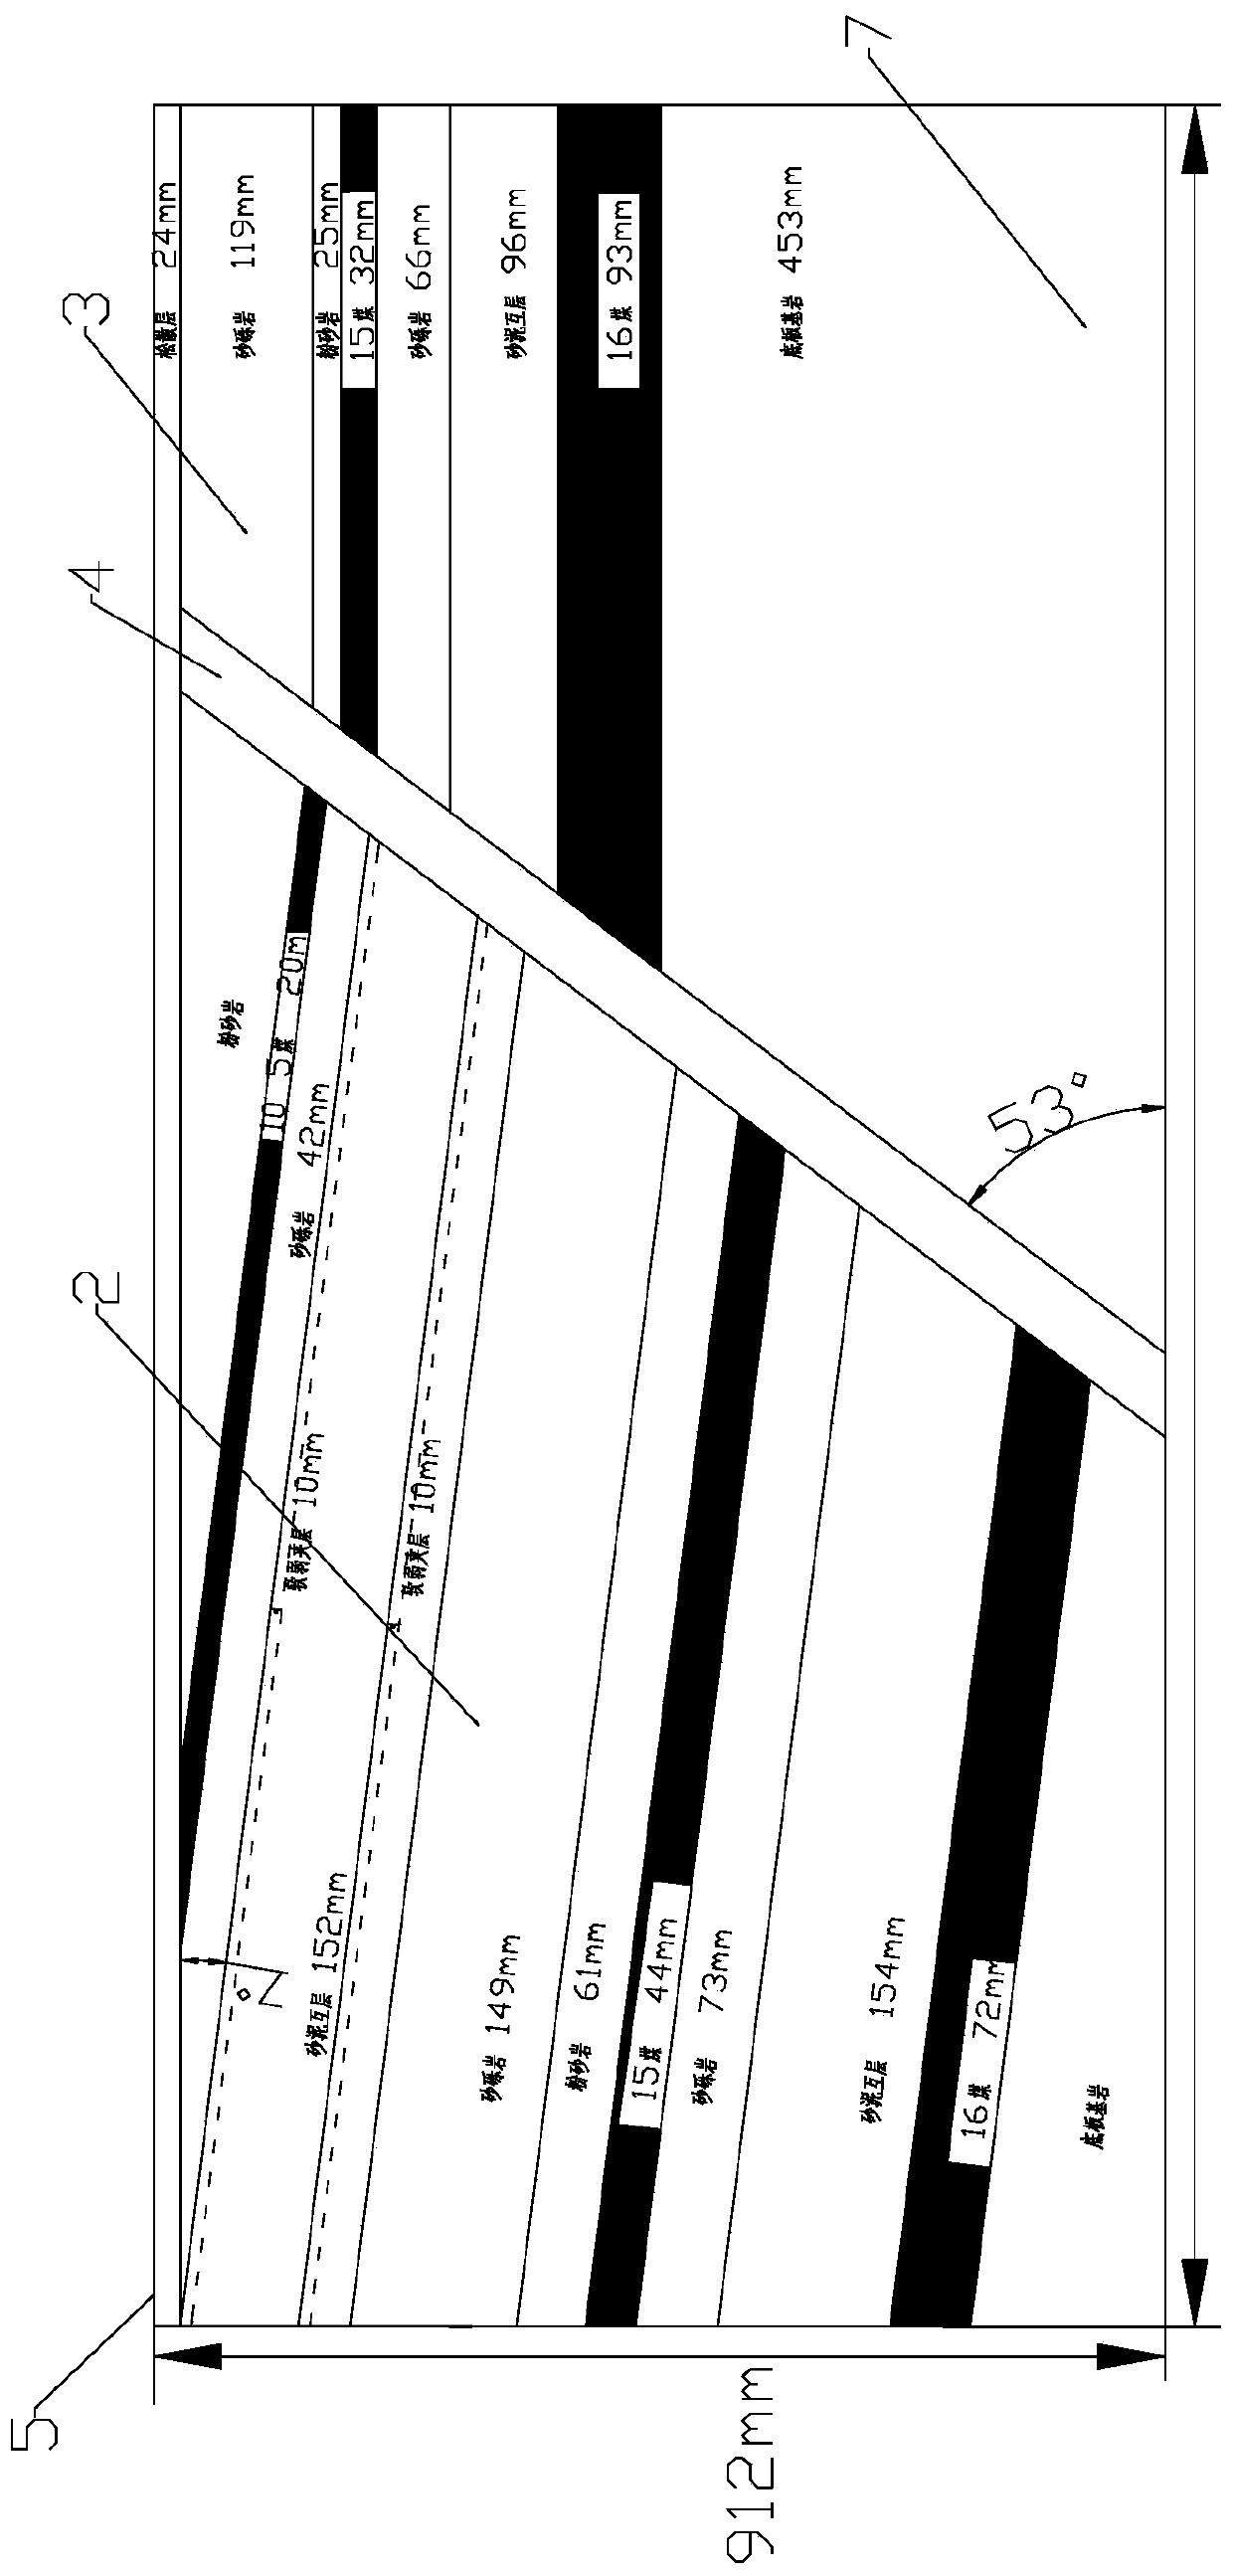 Partition plate mechanism for making similar simulation experimental faults